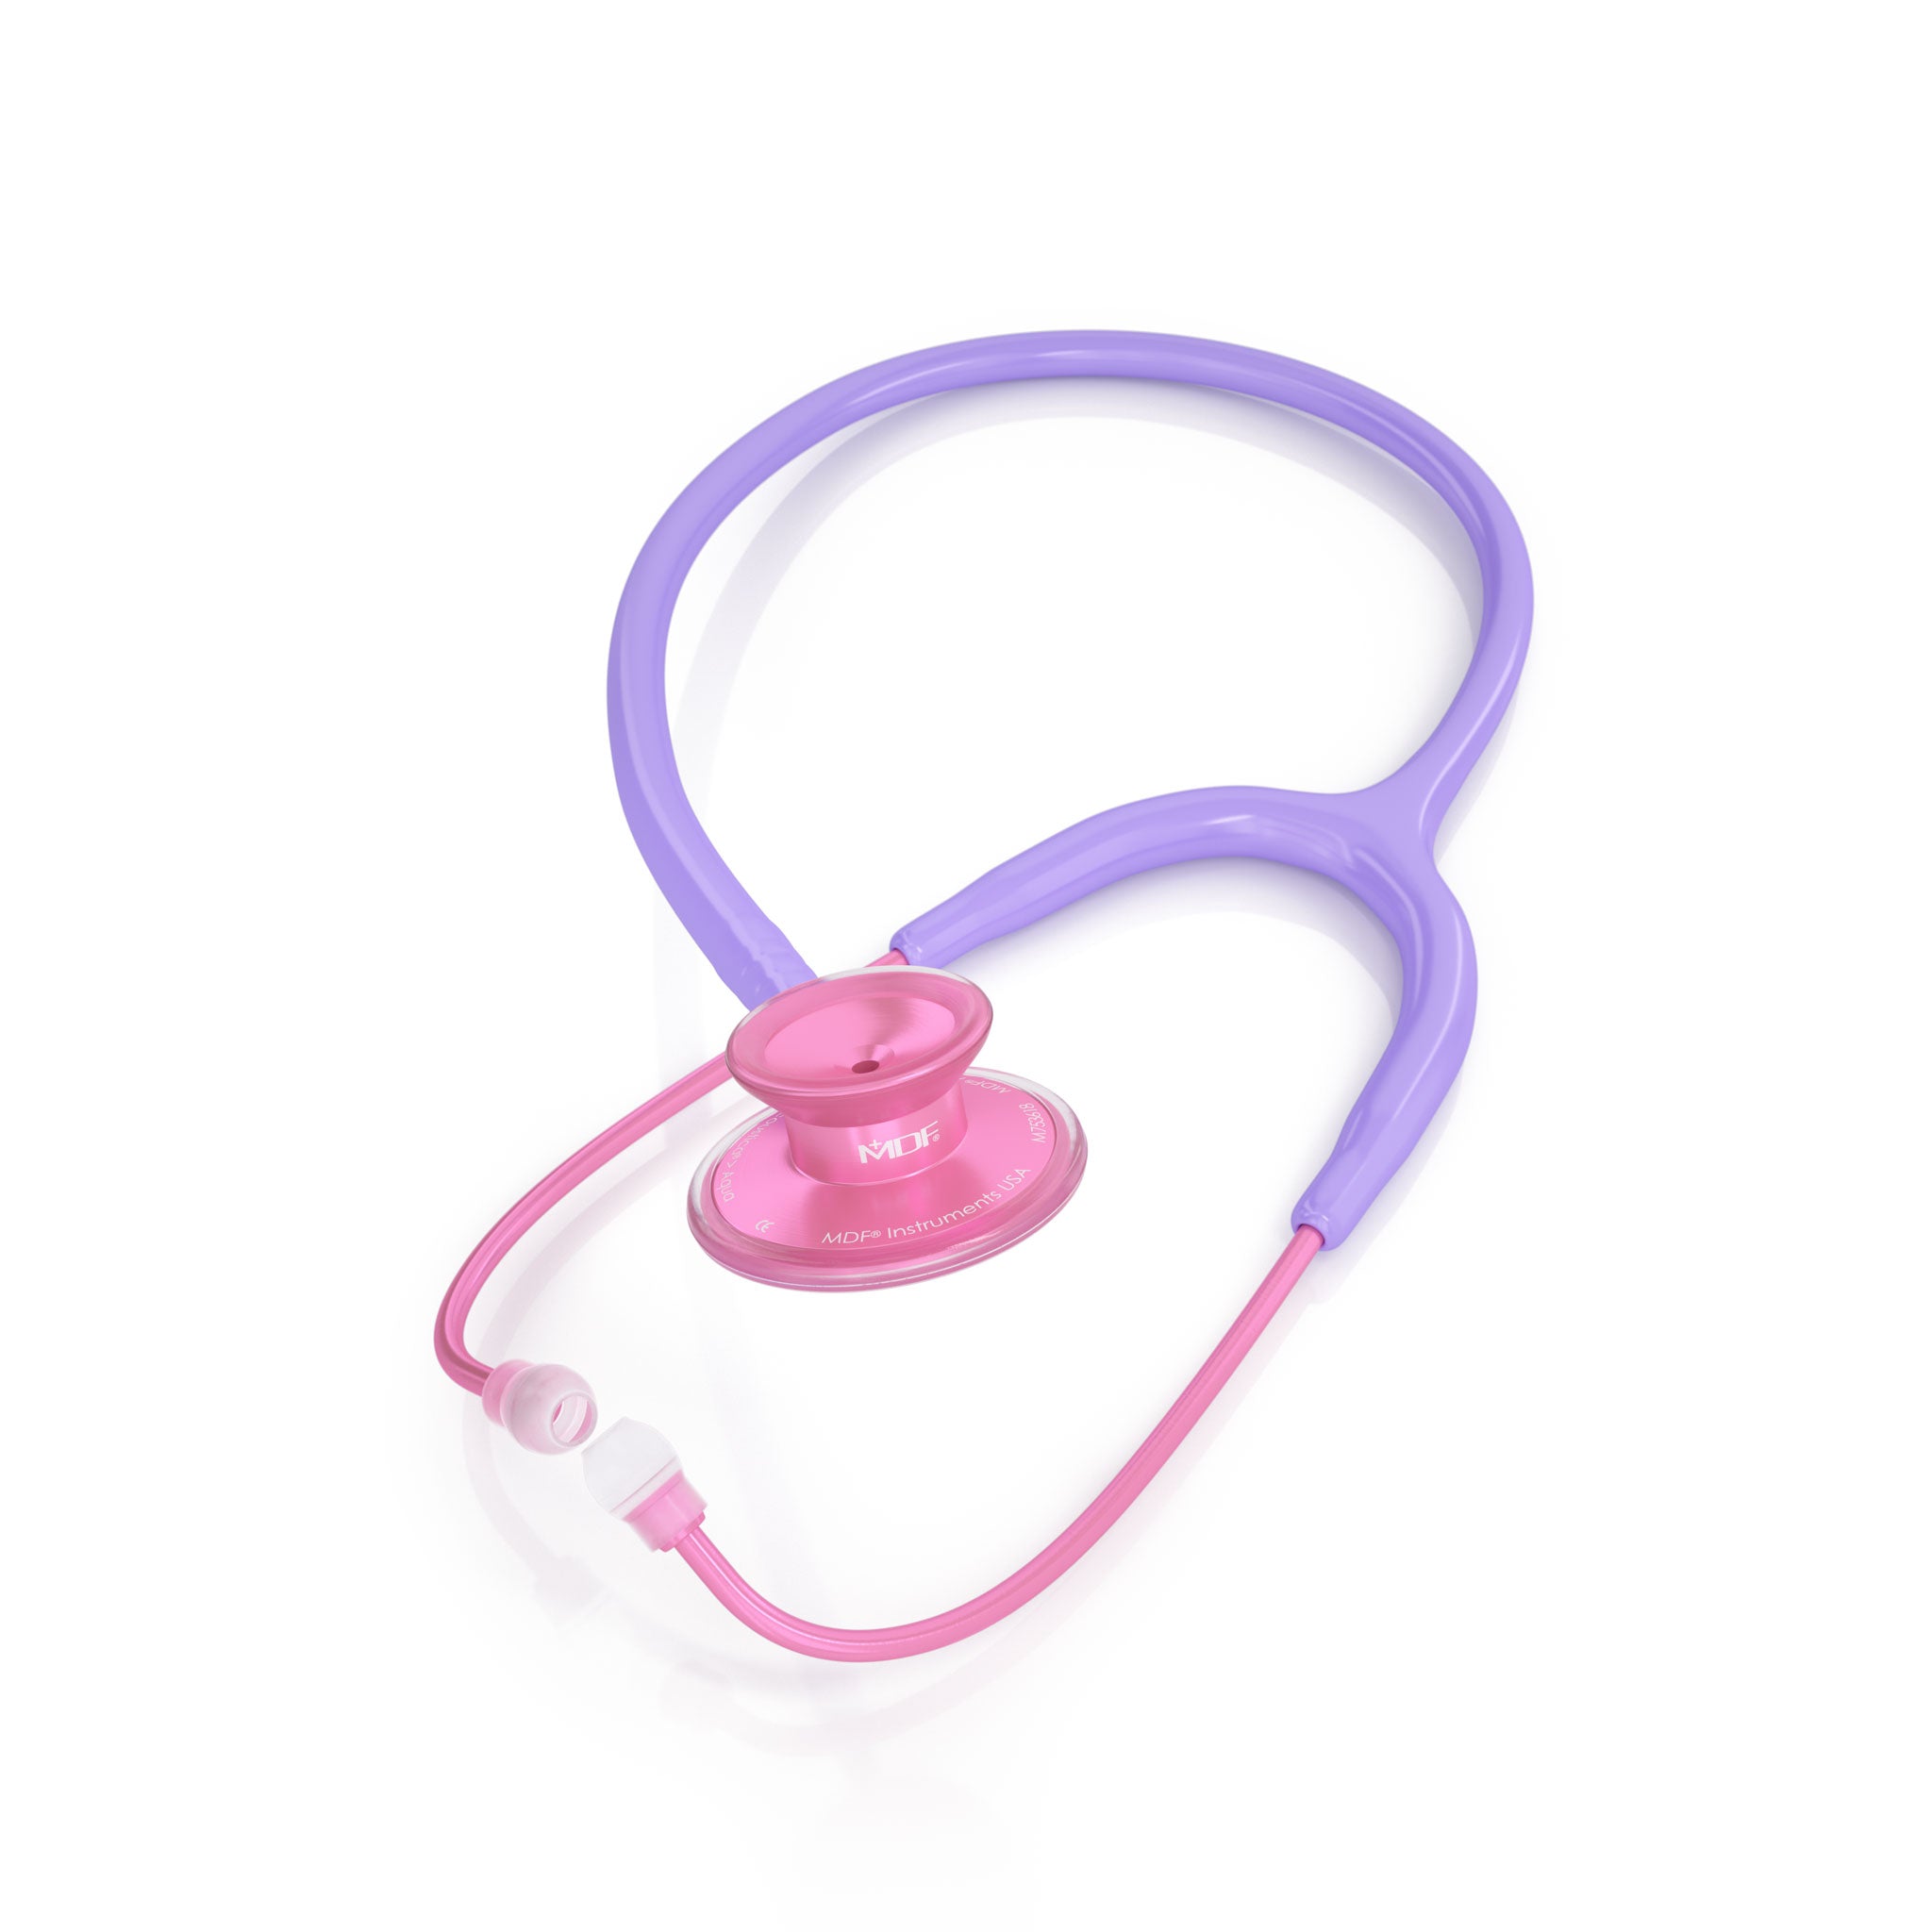 Pink Stethoscope MDF Instruments Acoustica Pinkore Cher Light Purple